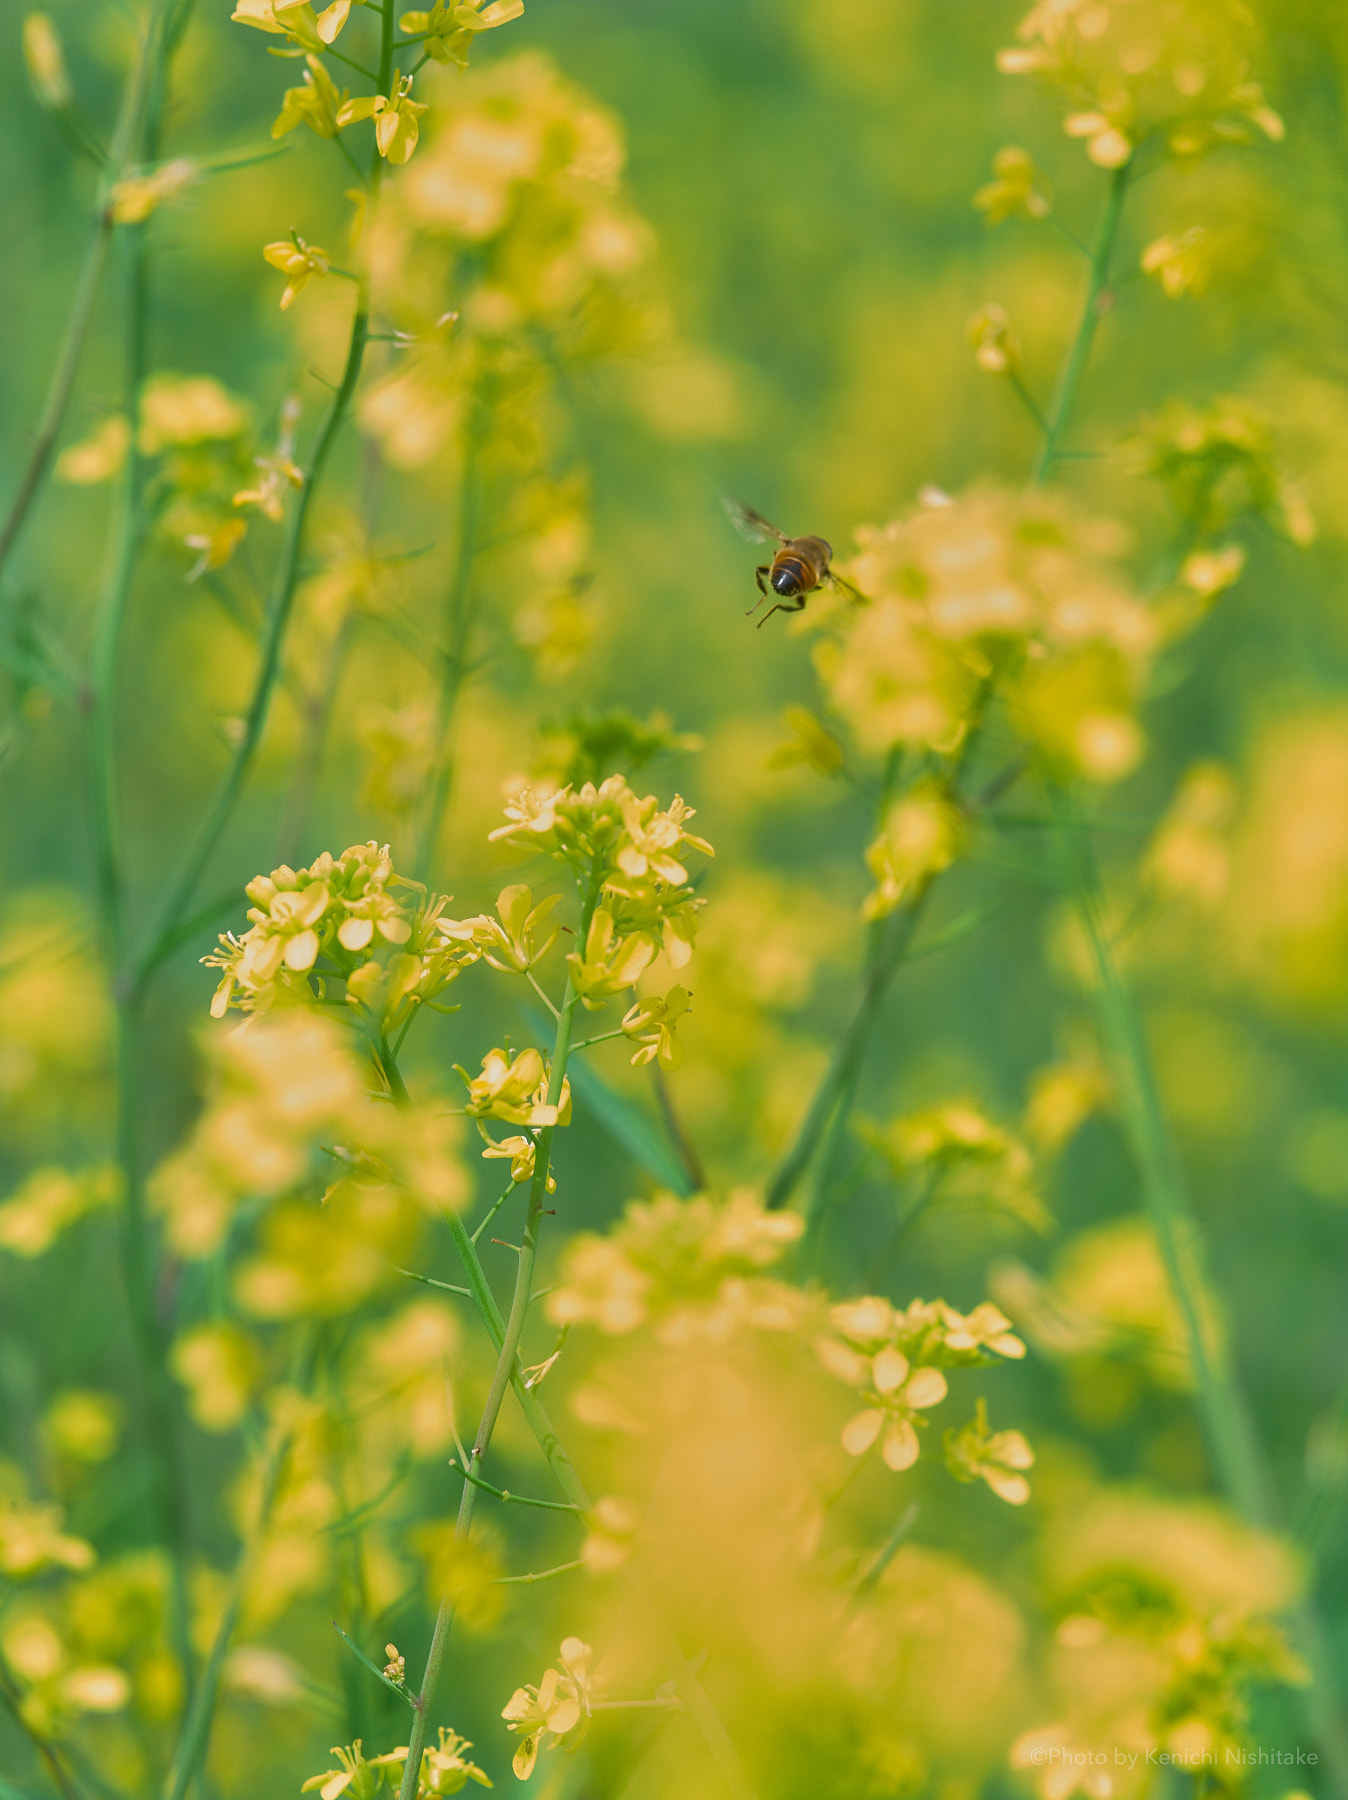 Pentax 645D sample photo. Field mustard and honey bee photography